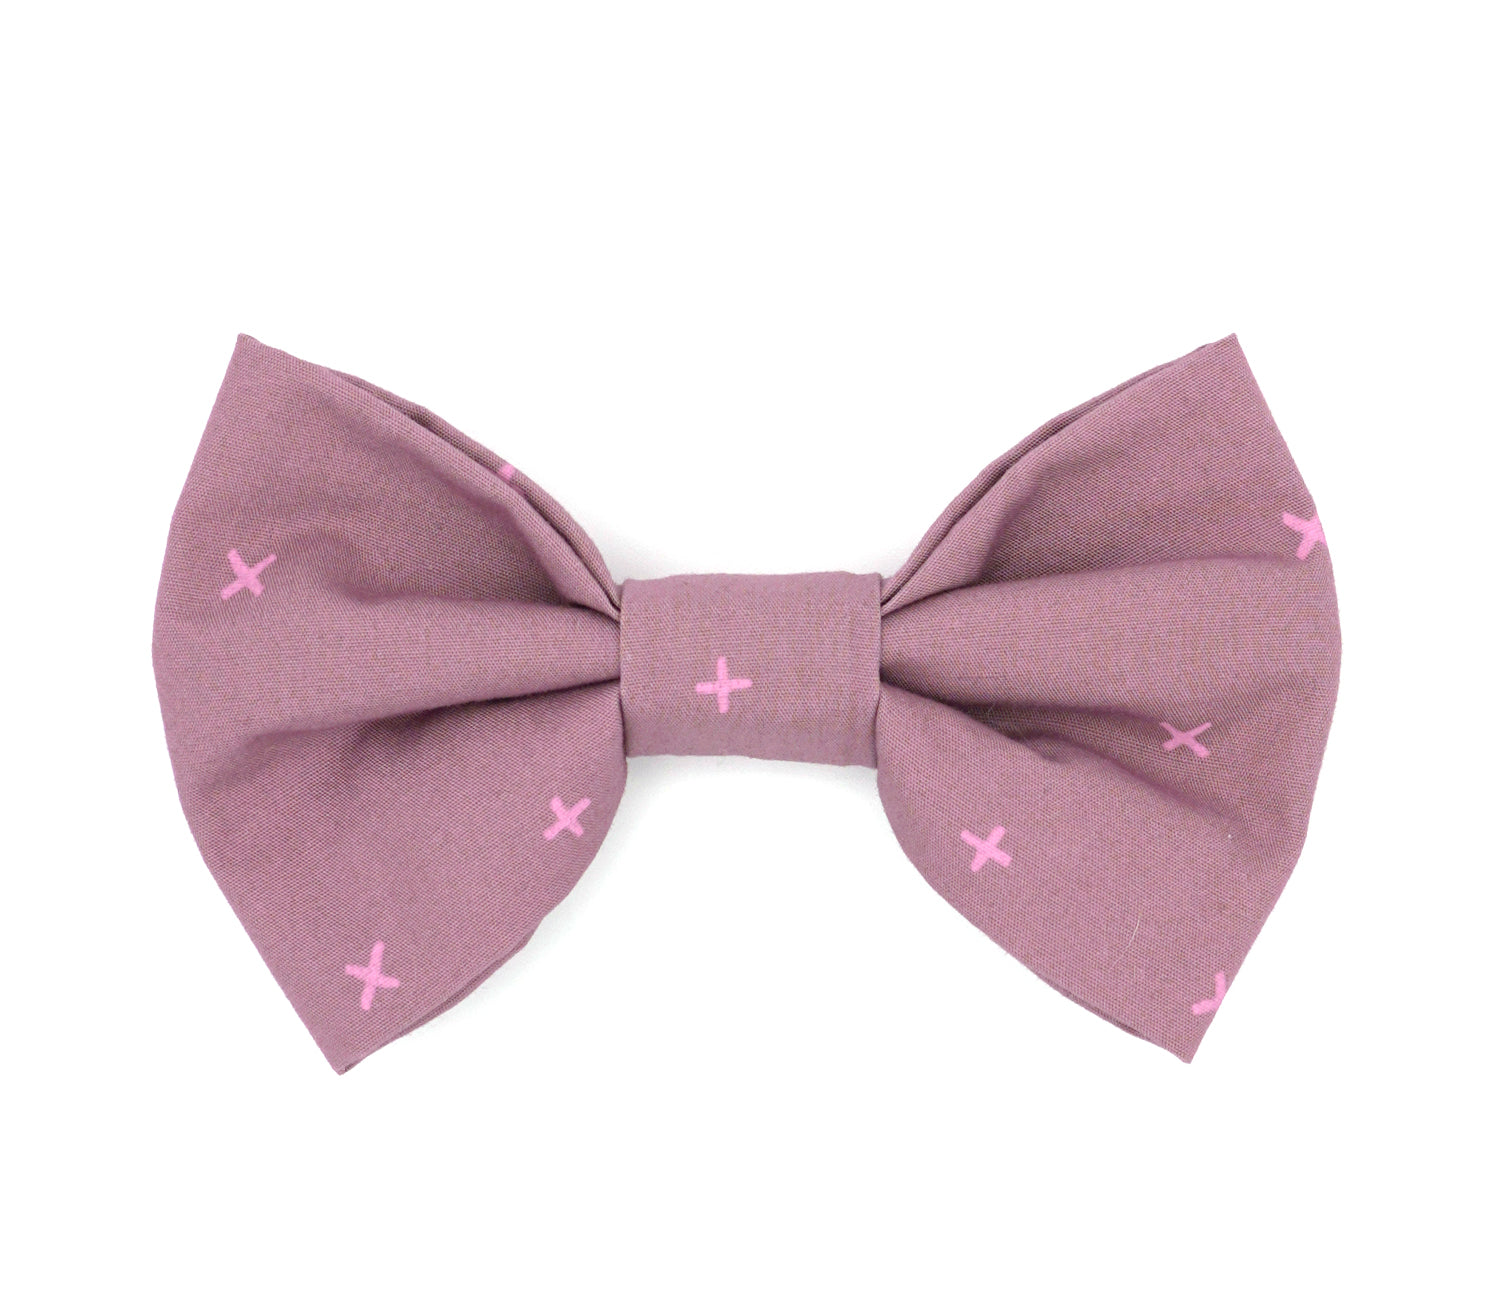 Handmade cotton bow tie for dogs (or other pets). Elastic straps on back with snaps make it easy to add to collar, harness, or leash. Lilac background with purple/pink Xs.